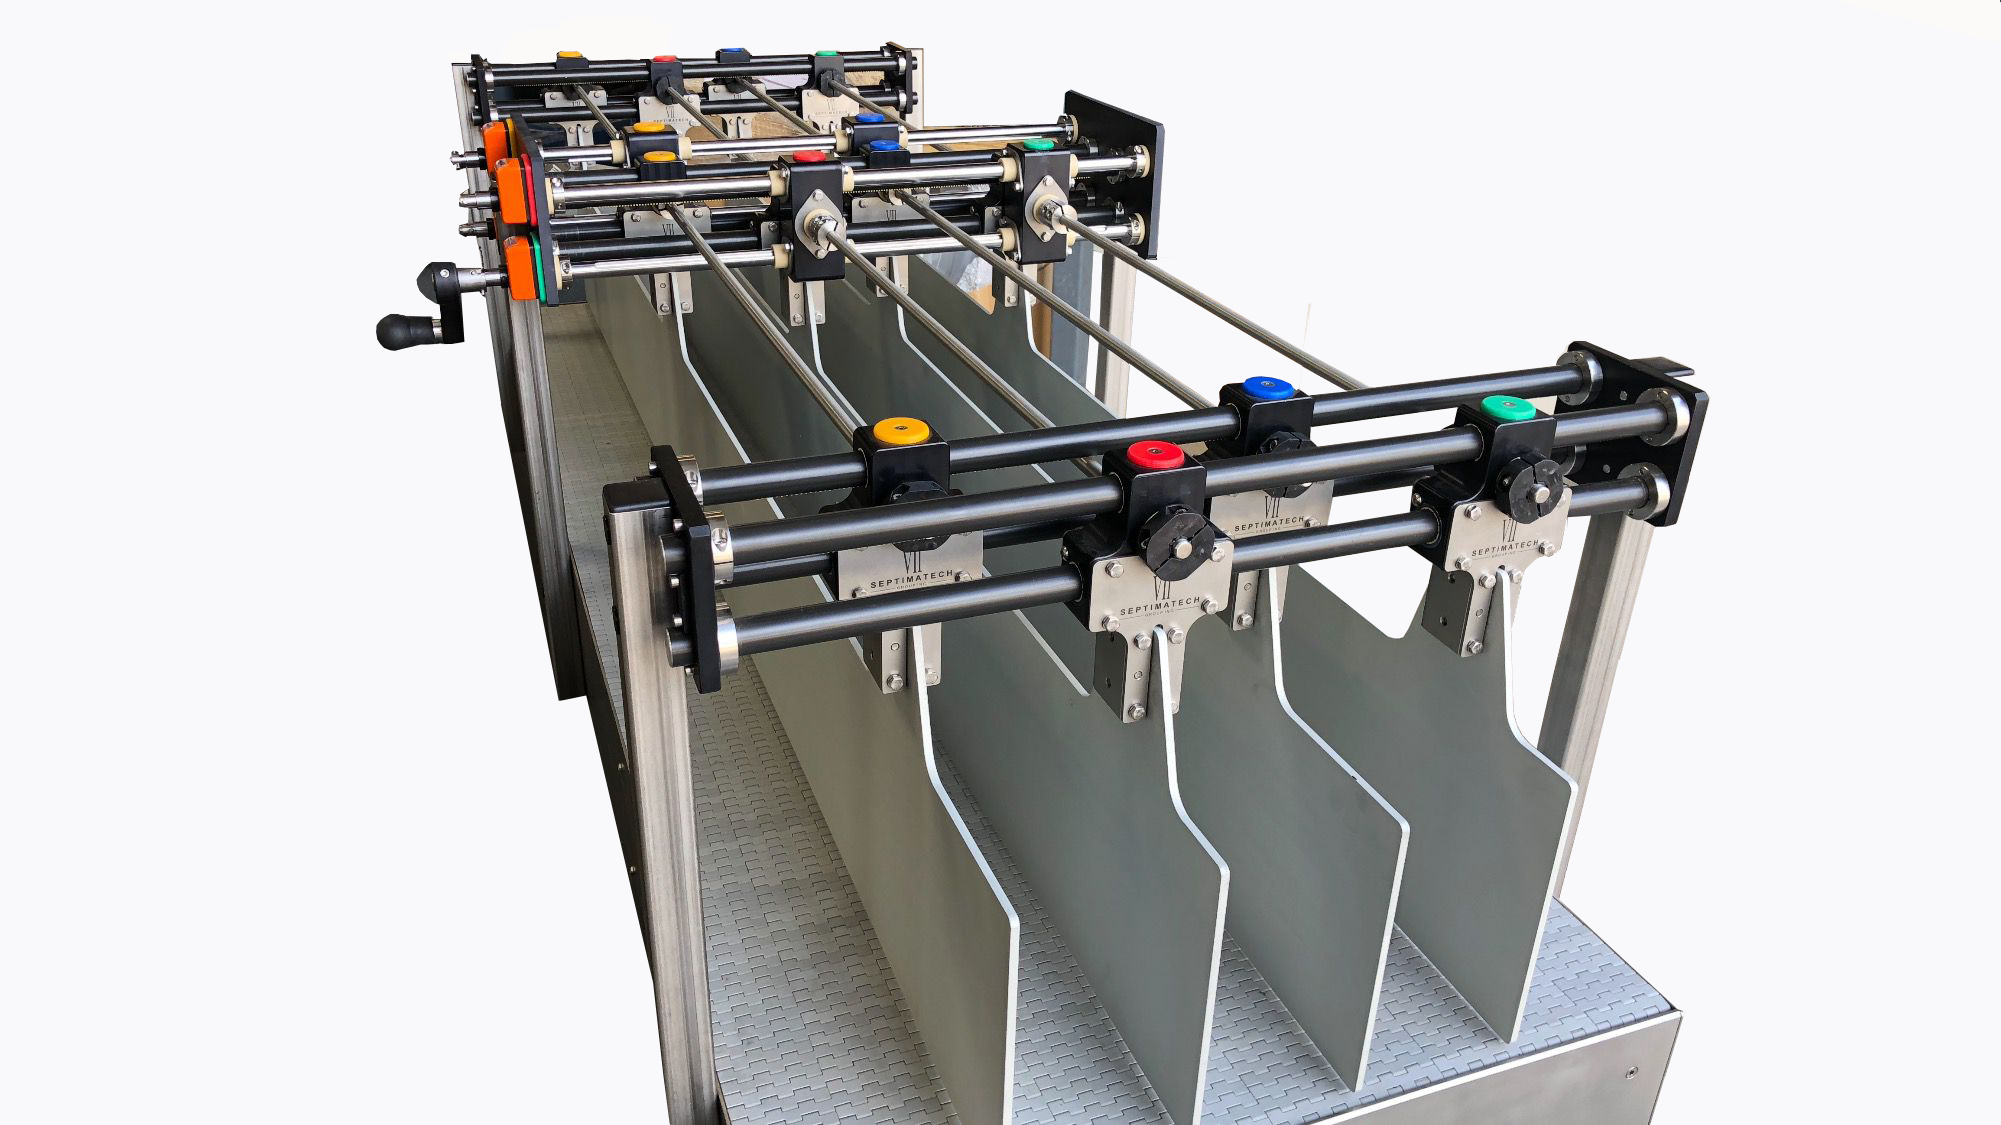 Septimatech’s Multi-Lane Adjust, also at PACK EXPO, eliminates change parts, lane spacers and heavy lifting to deliver quick, simple changeovers and adjustment of packaging lines with multiple lanes.